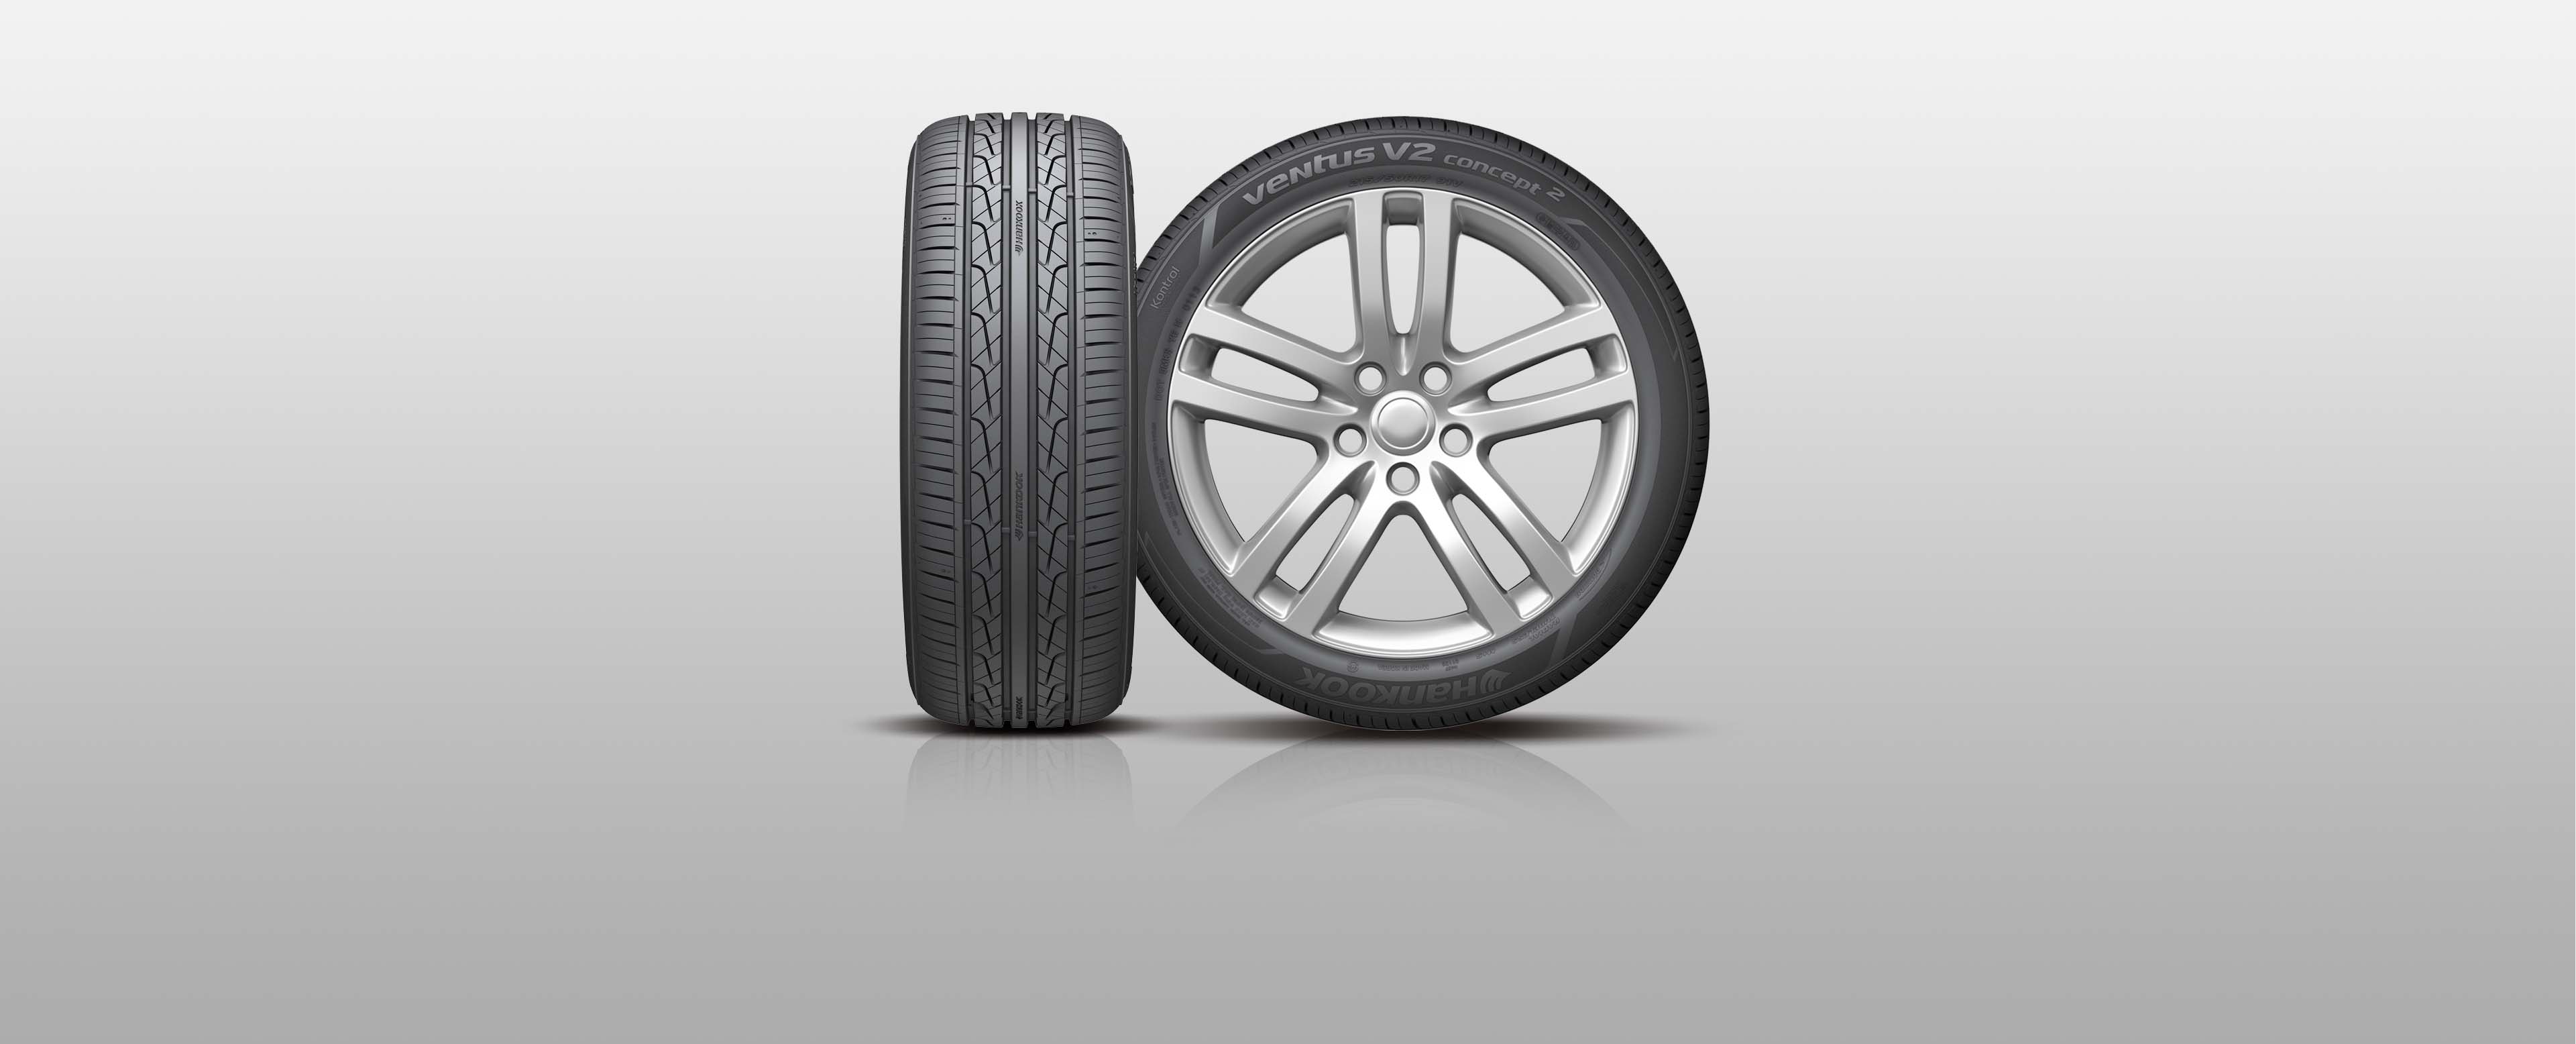 Hankook Tire & Technology-Tires-Ventus-Ventus V2 concept2-H457-Exhilarating experience